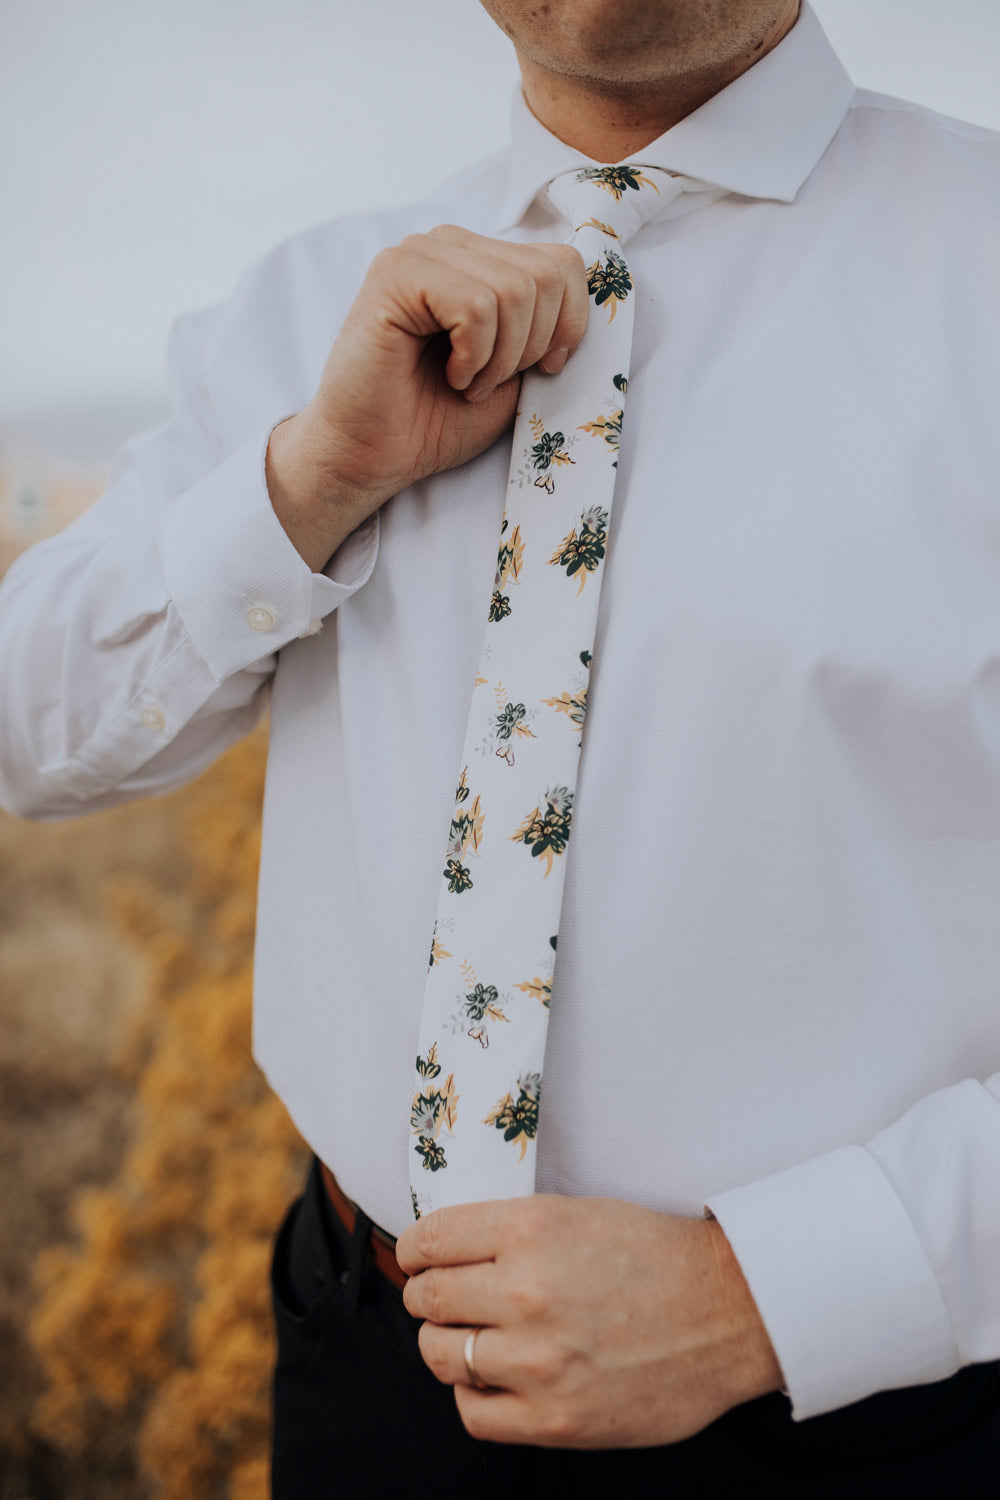 Honeysuckle tie worn with a white shirt, brown belt and black pants.